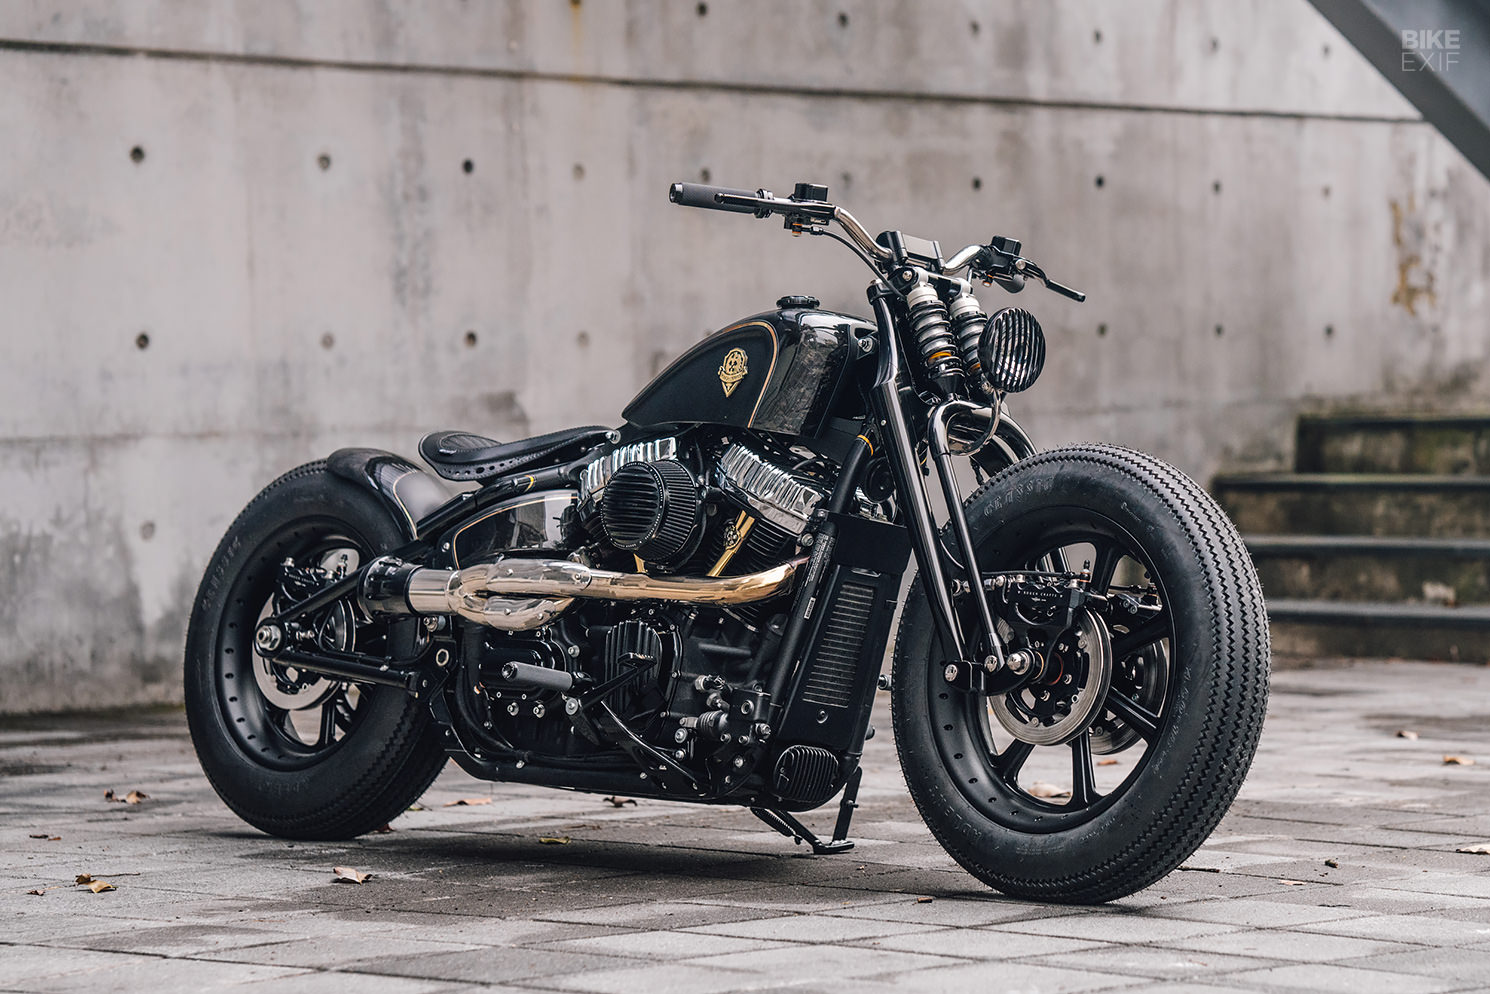 Back to basics: A Harley Fat Bob in Rough Crafts' signature style